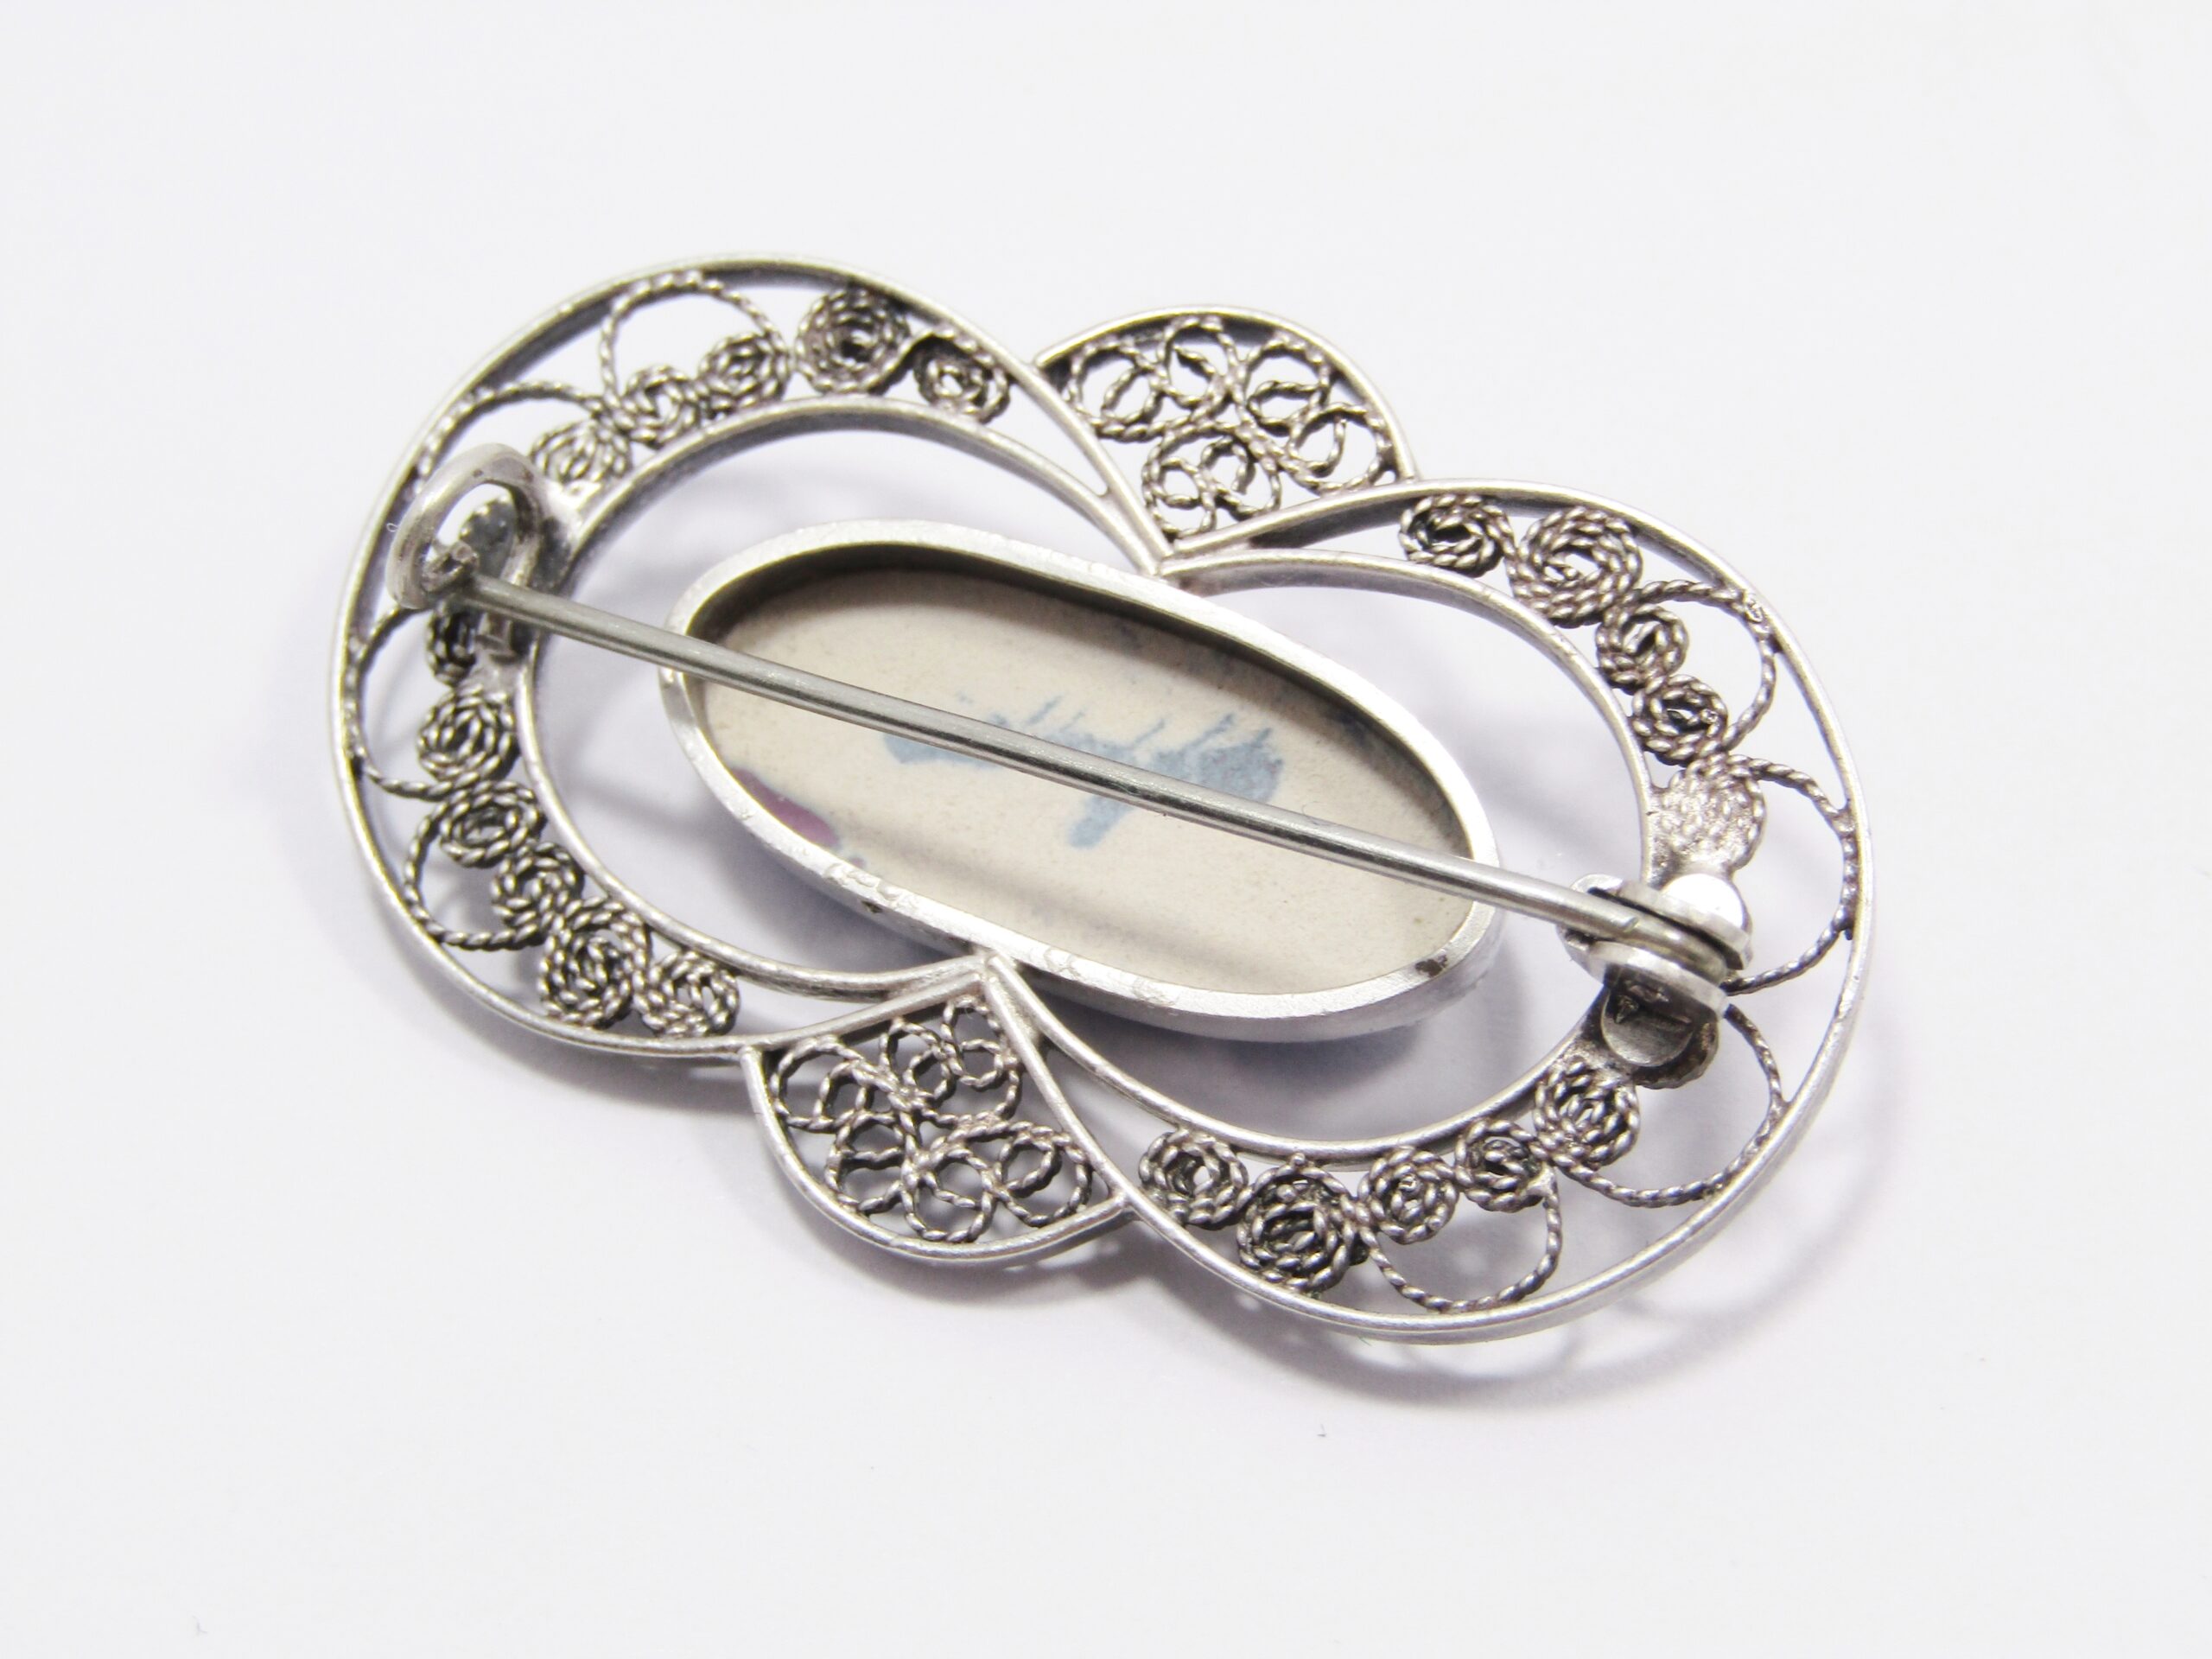 A Stunning Vintage Delft Brooch in Silver